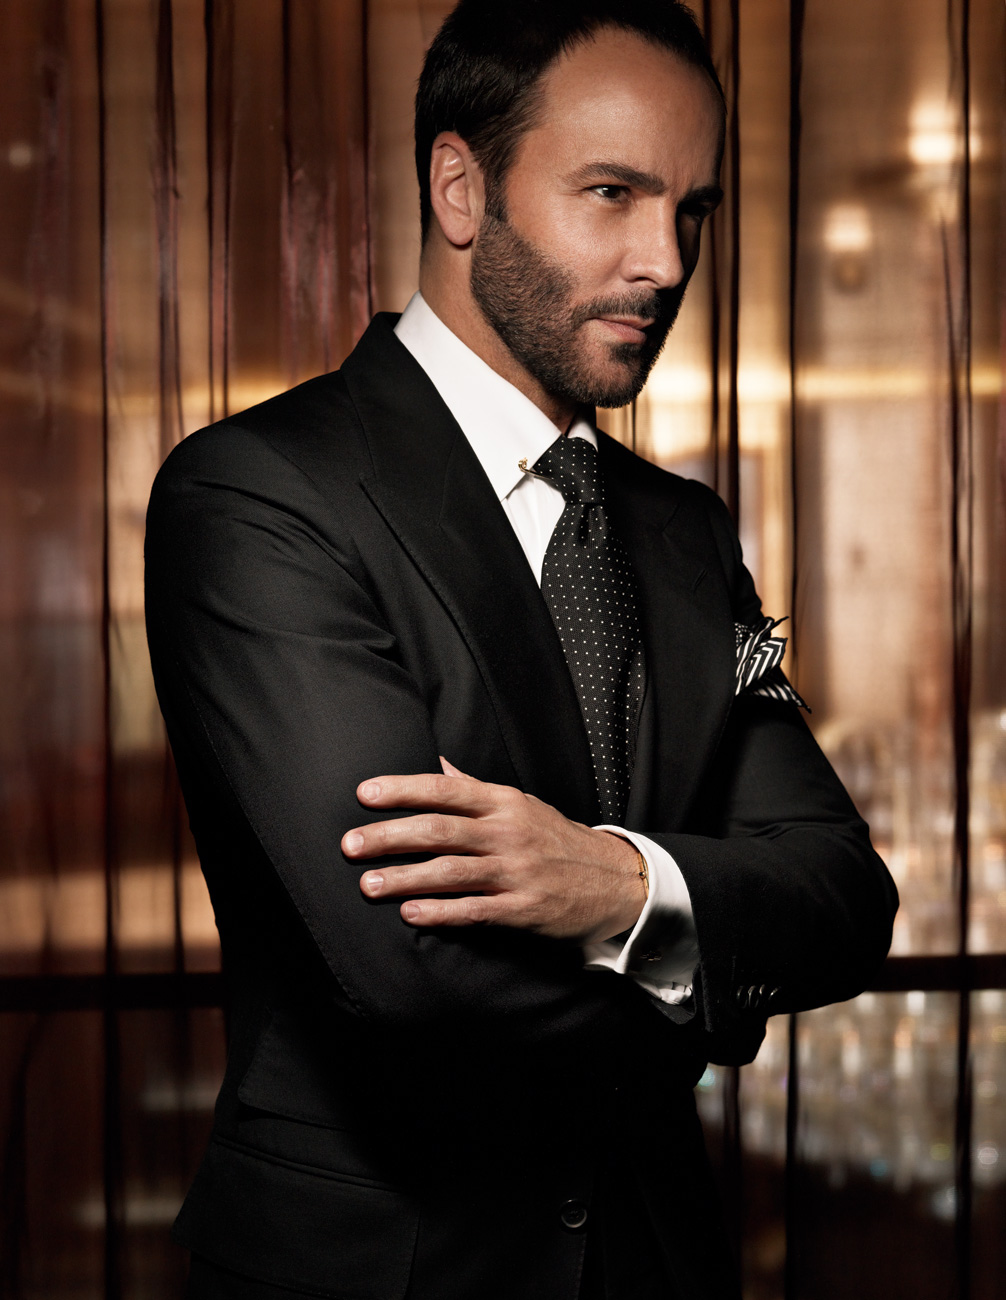 skal acceptere Leia Tom Ford - Interview Magazine